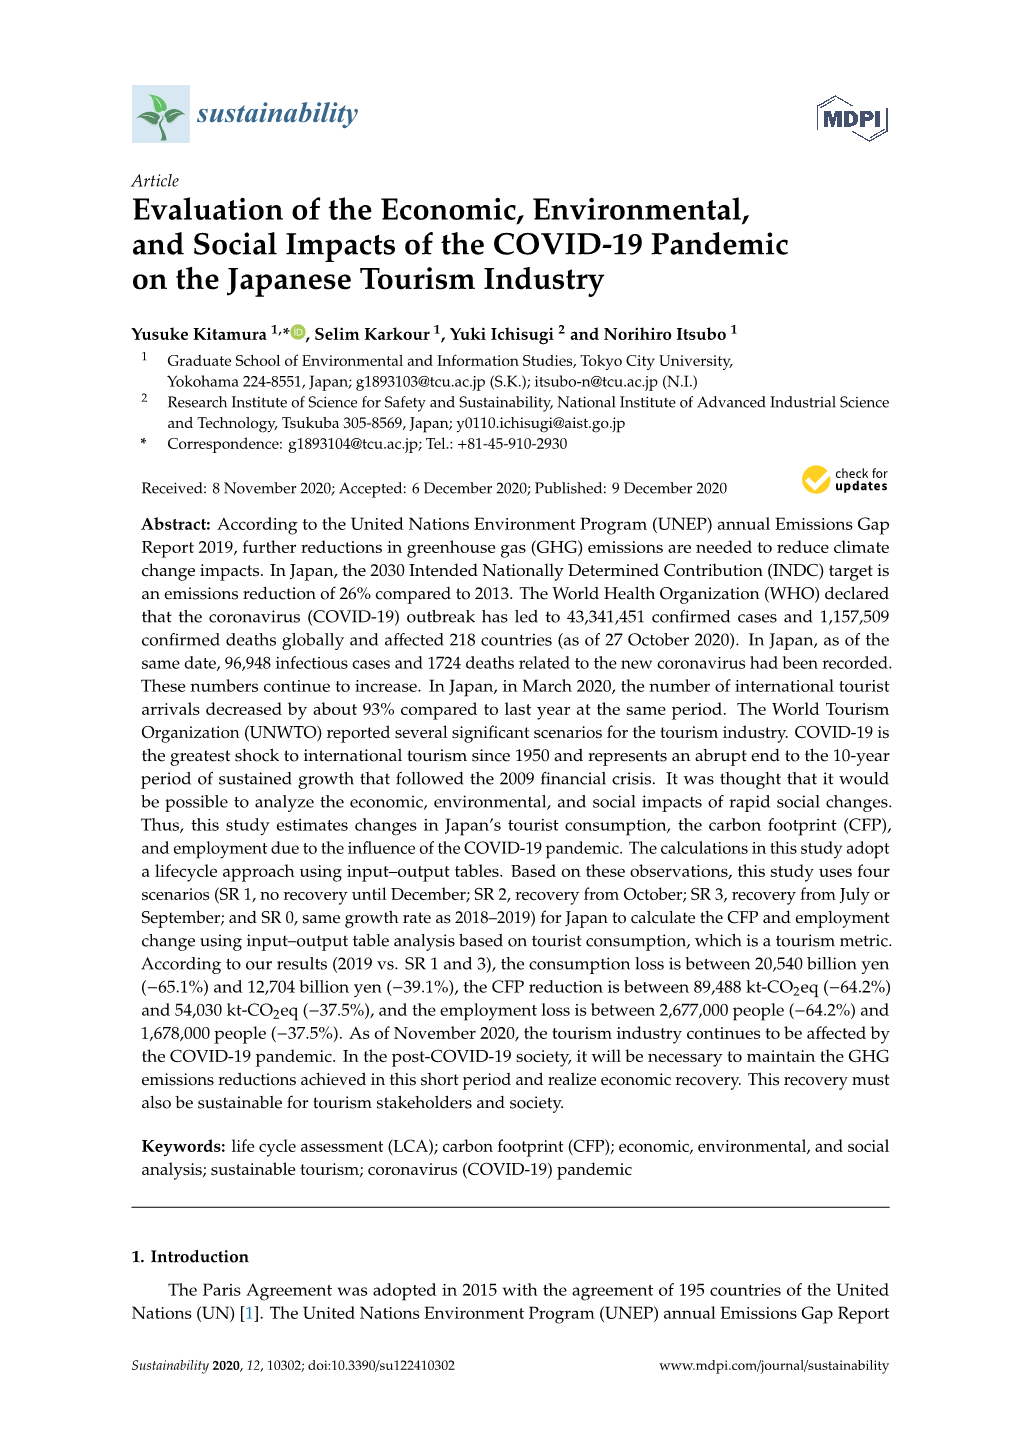 Evaluation of the Economic, Environmental, and Social Impacts of the COVID-19 Pandemic on the Japanese Tourism Industry